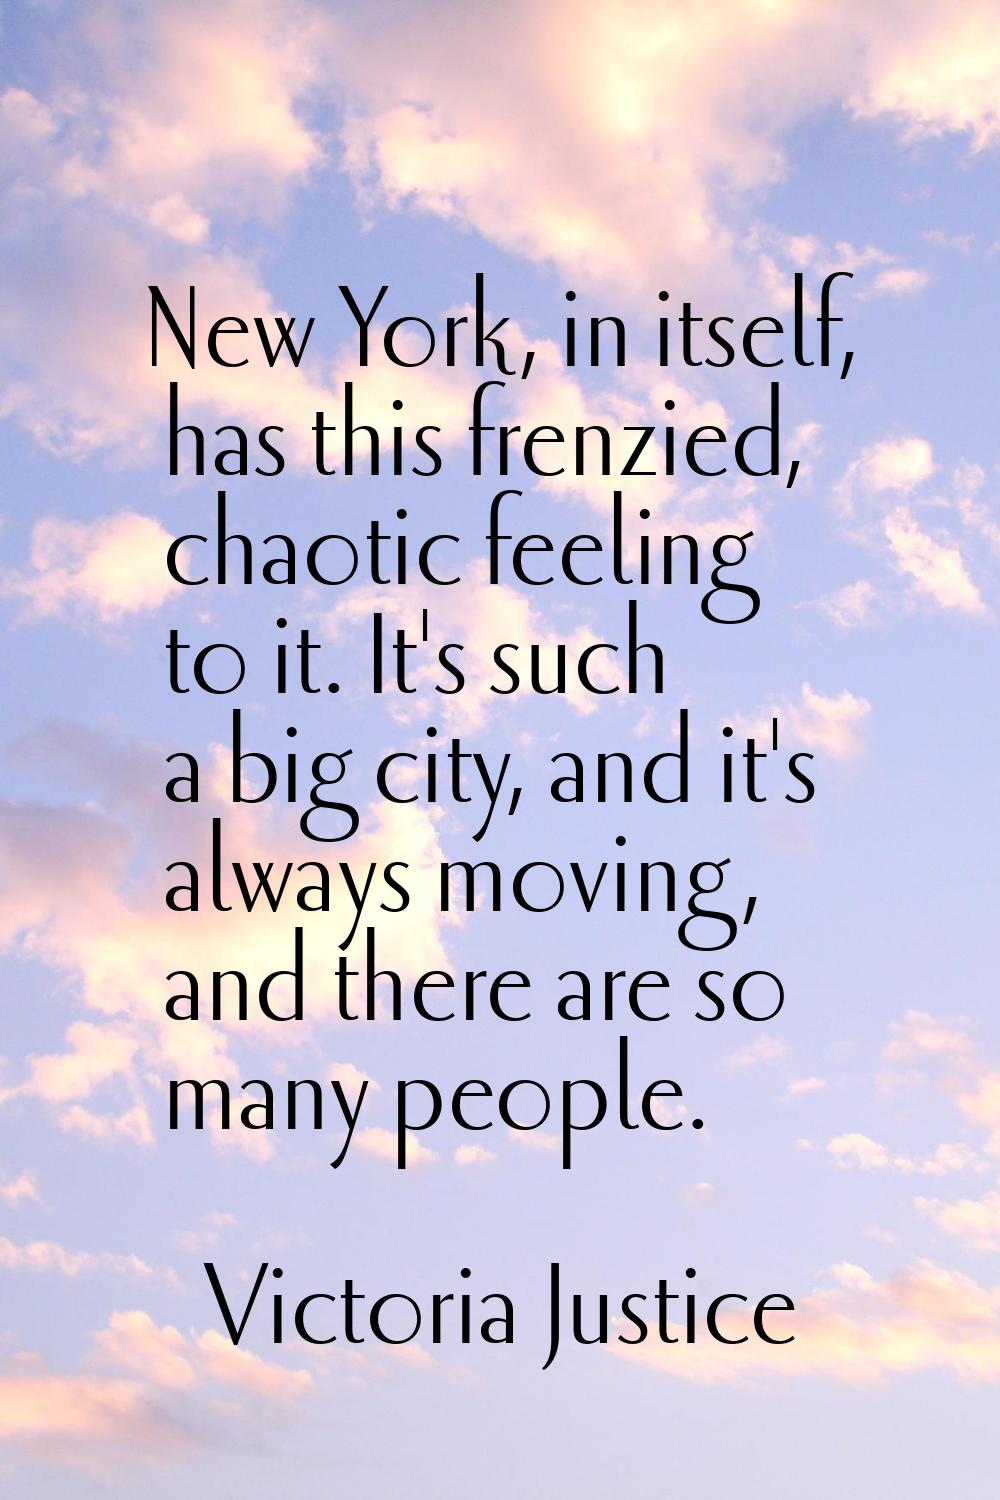 New York, in itself, has this frenzied, chaotic feeling to it. It's such a big city, and it's alway